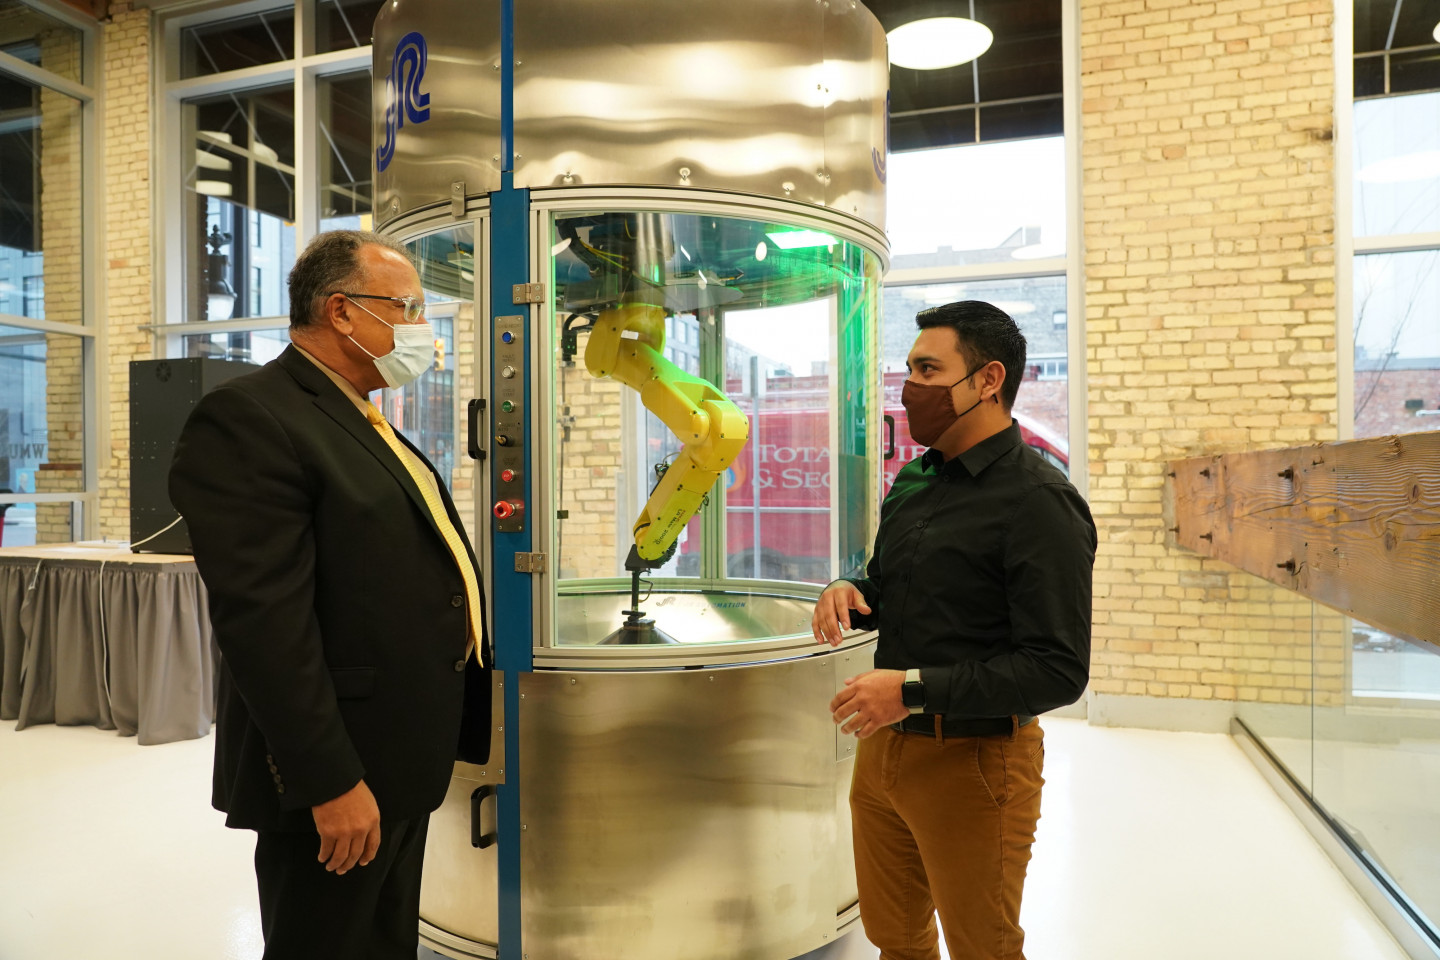 President Montgomery and Aunner Calderon stand in front of a piece of machinery at the WMU-Grand Rapids campus.